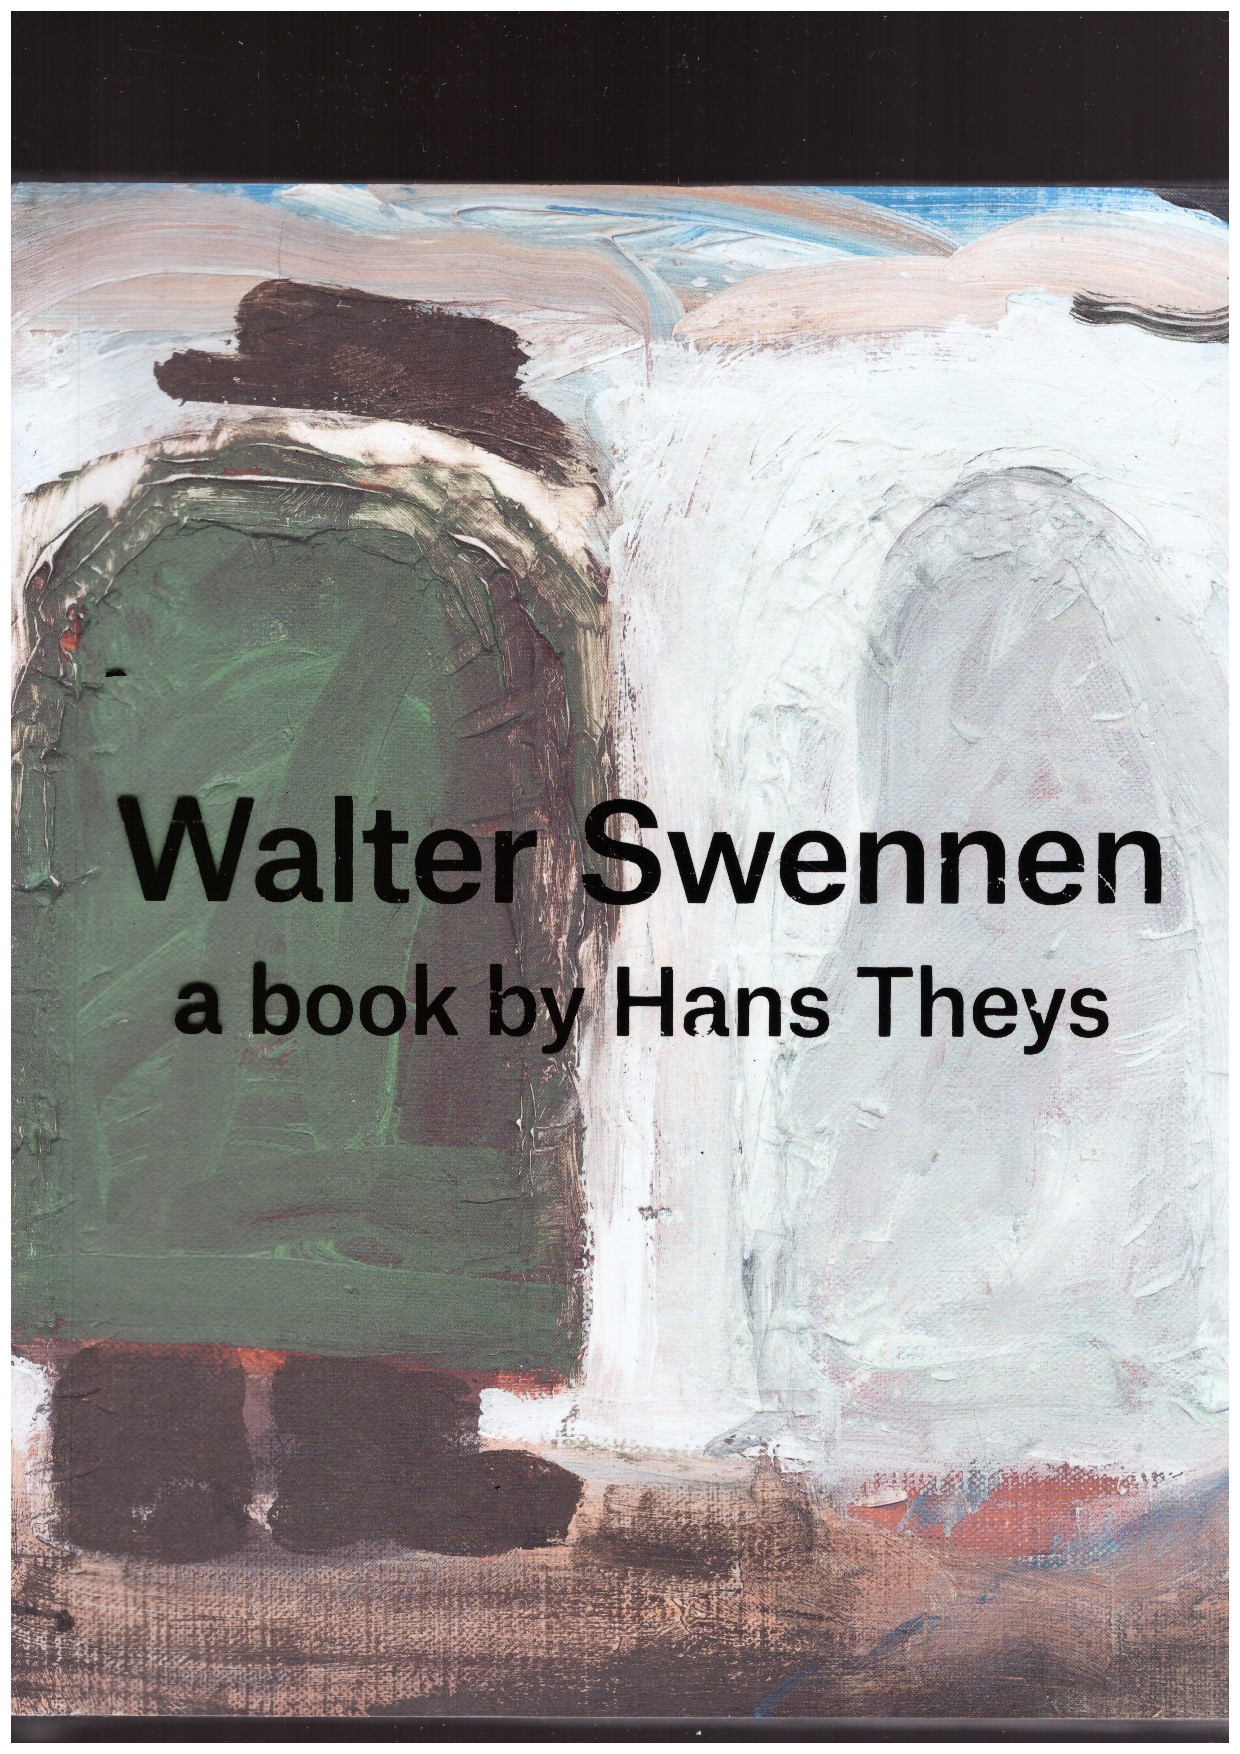 THEYS, Hans - Walter Swennen. Too many words